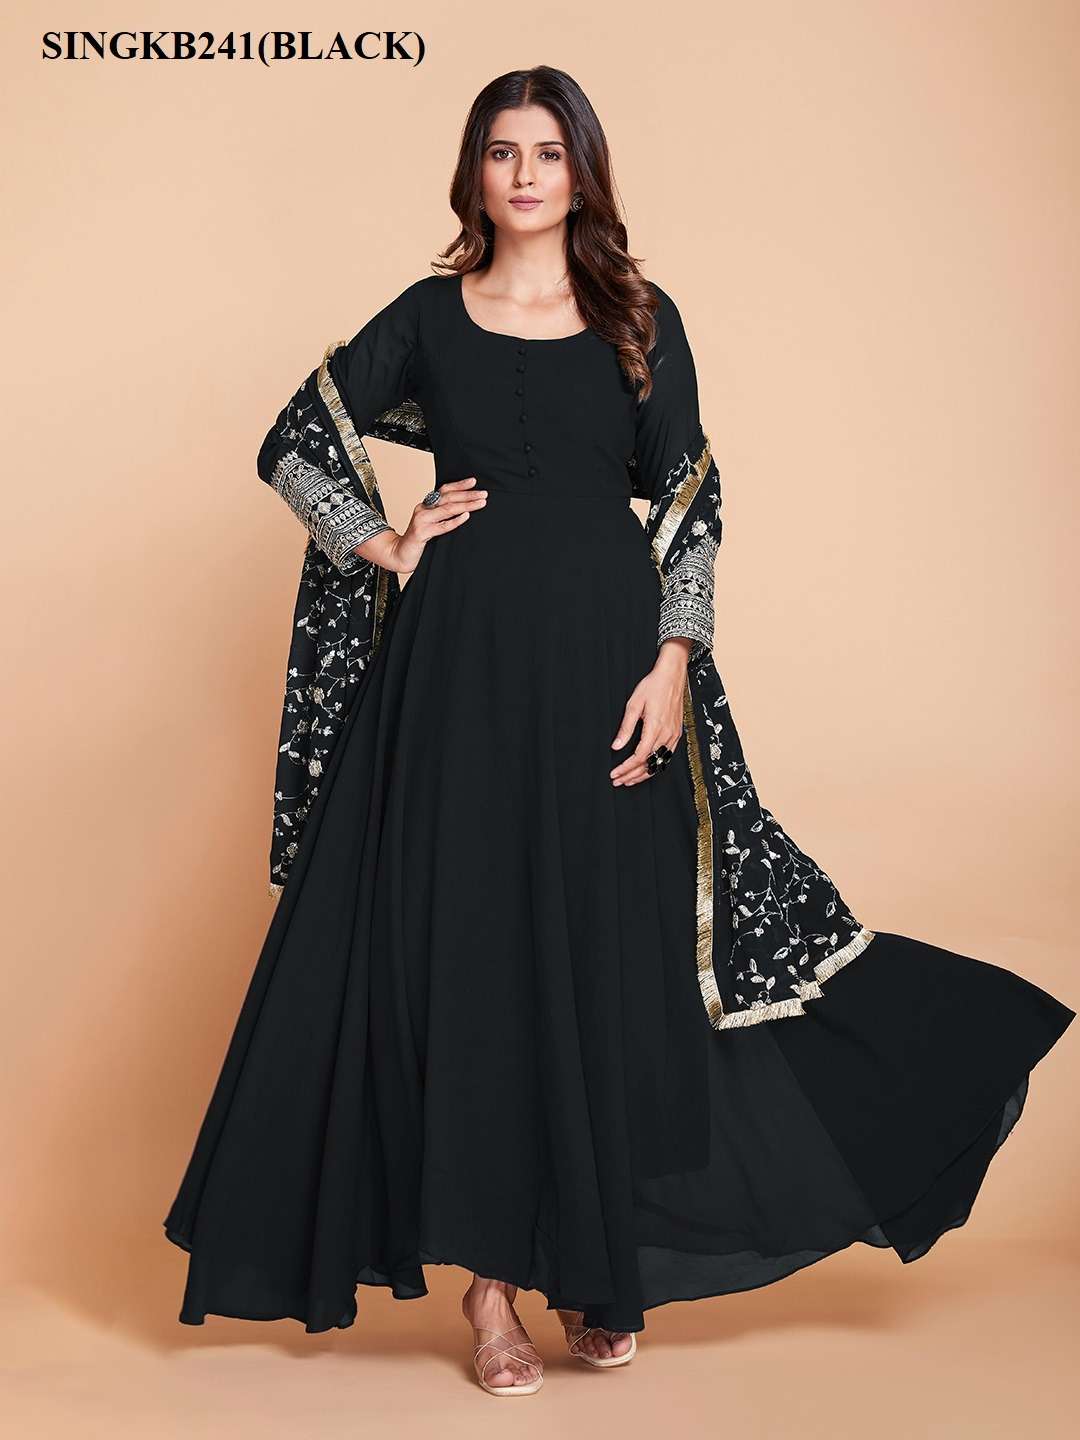 arya designs singkb241black color fancy readymade single long gown with pant and dupatta